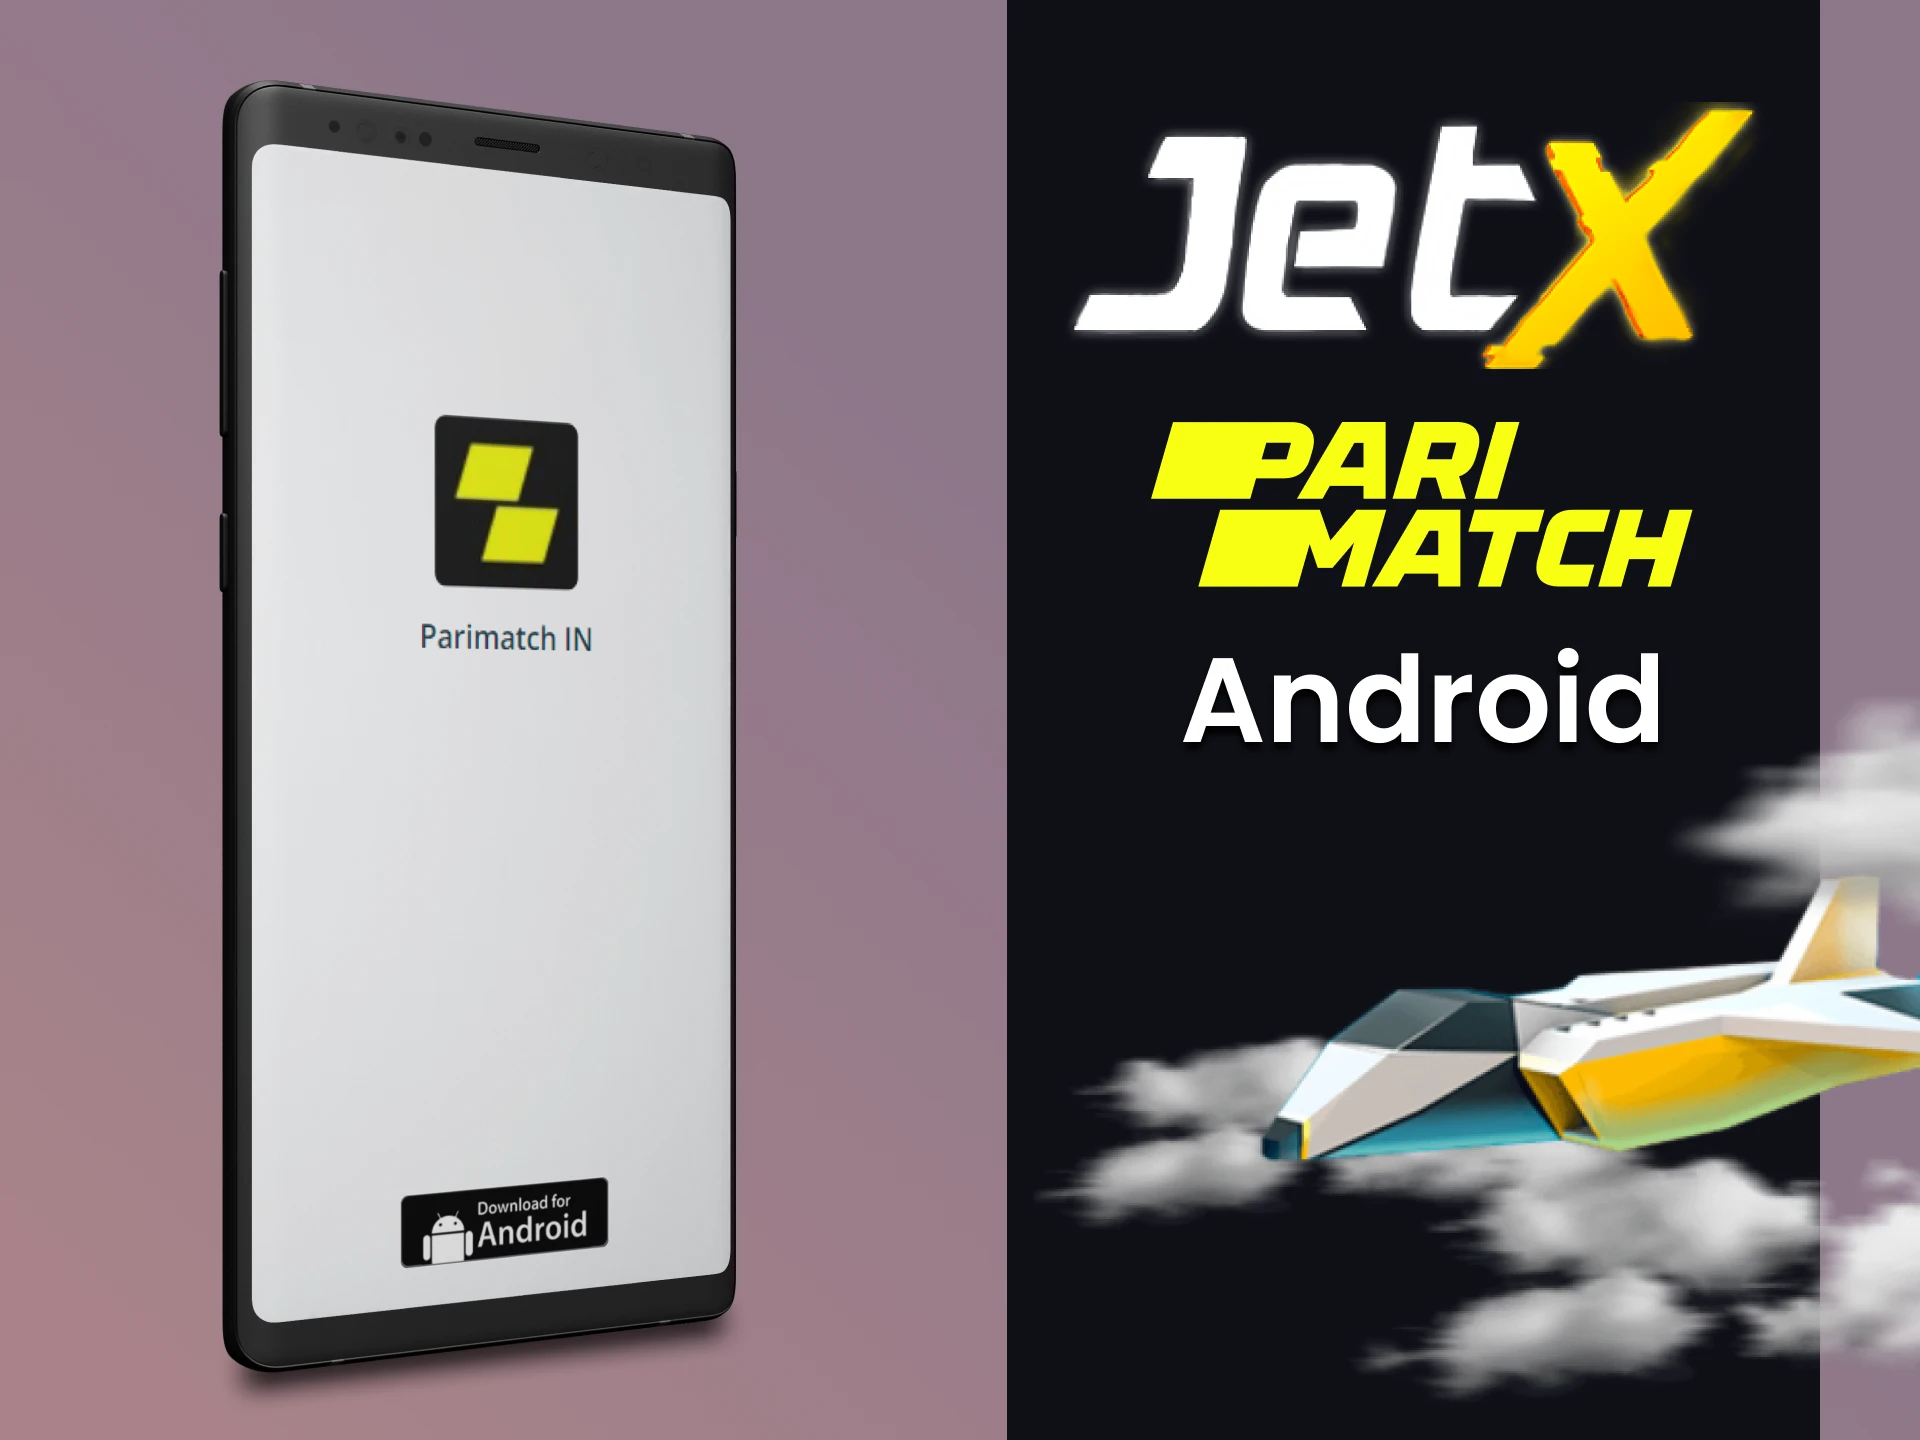 Install the Parimatch app on Android to play JetX.